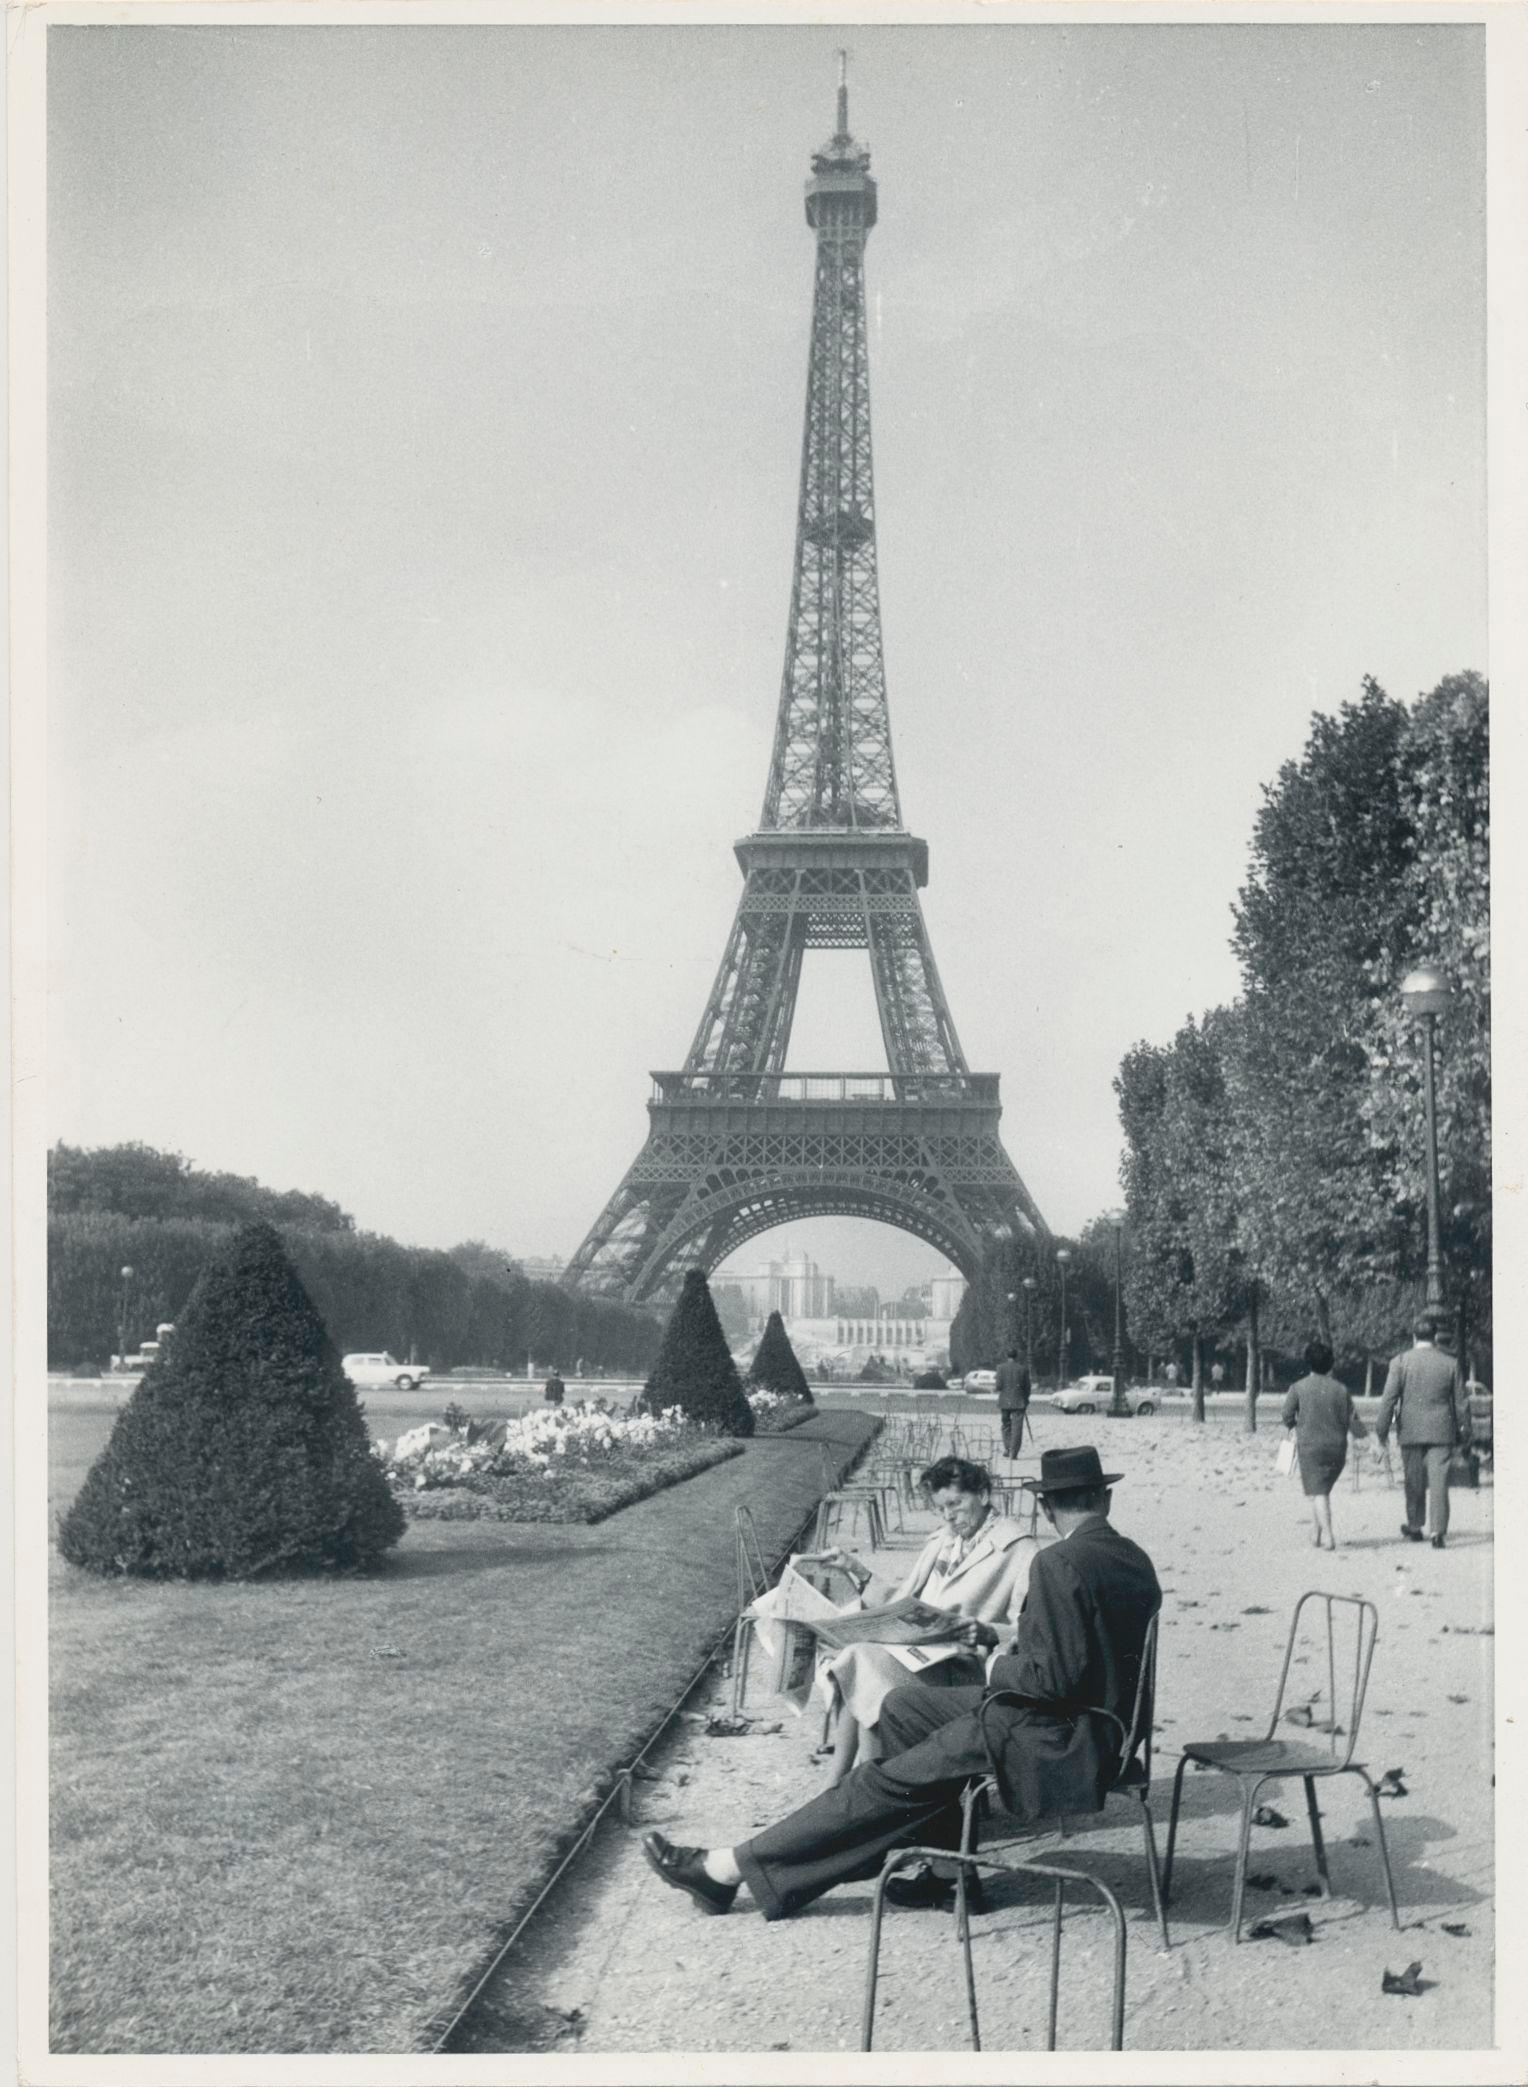 Erich Andres Black and White Photograph - Eiffel Tower, Street Photography, Black and White, Paris, 1950s, 17, 6 x 12, 8 cm